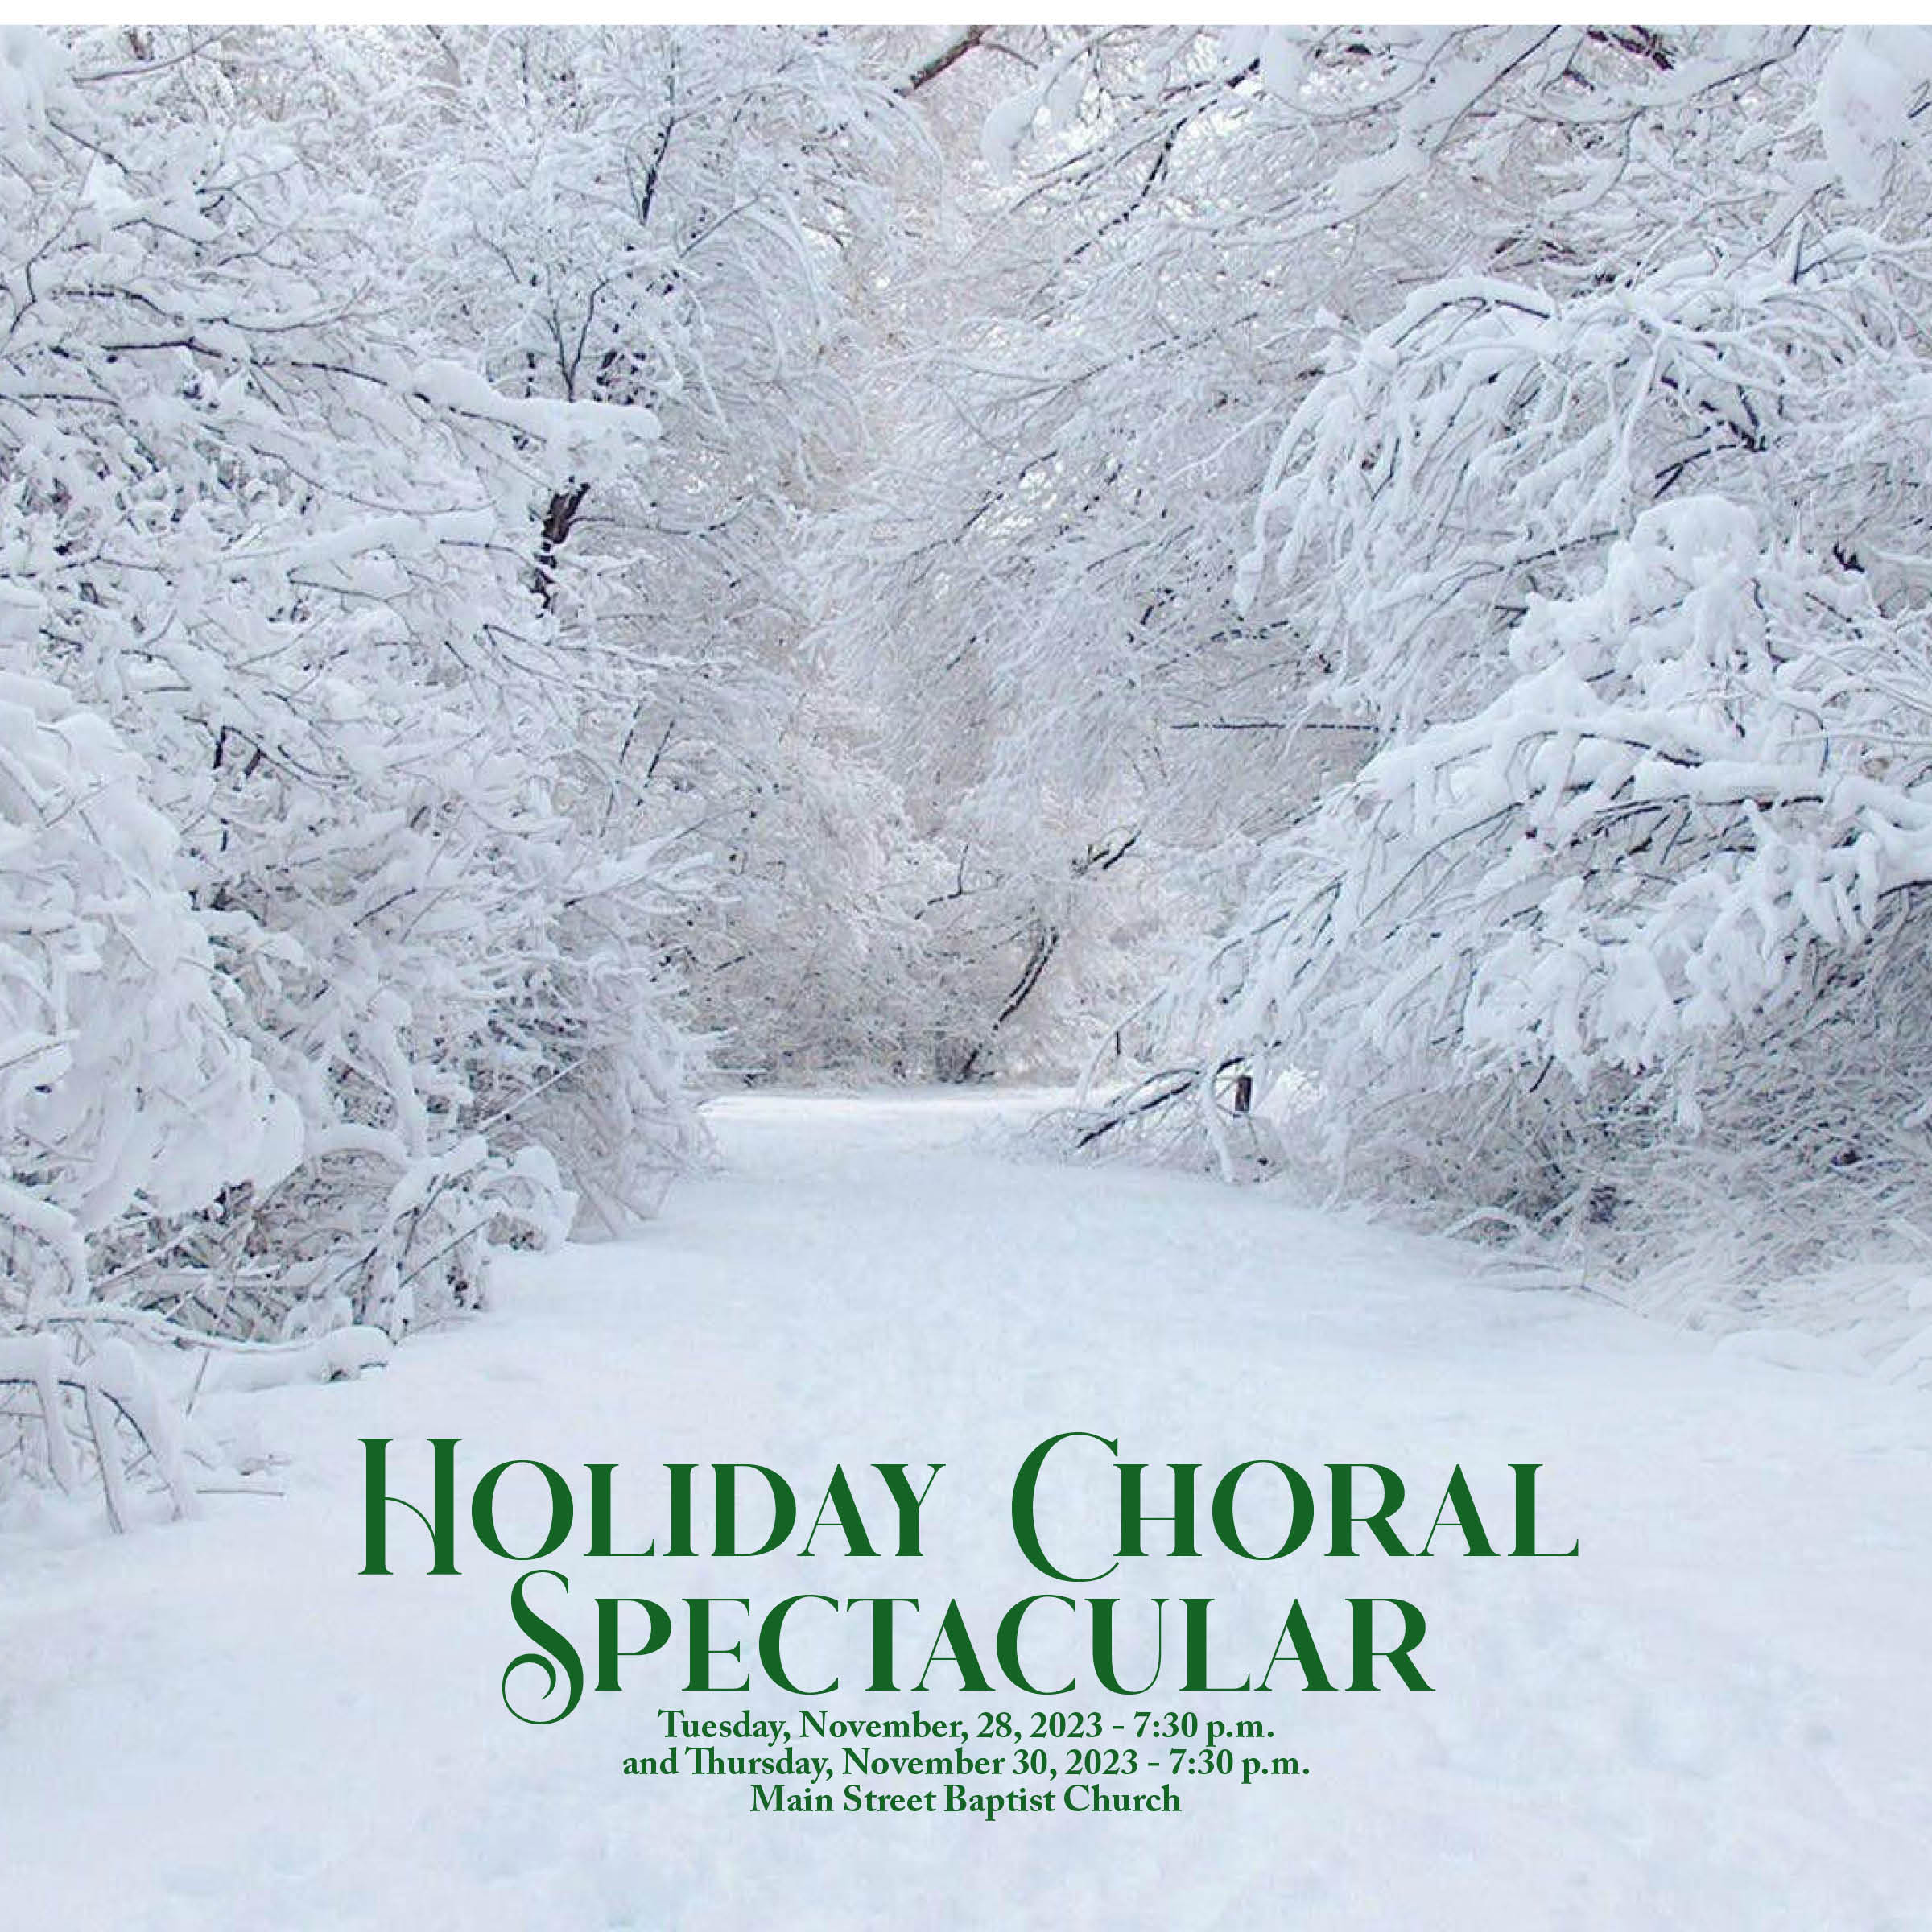 Holiday Choral Spectacular